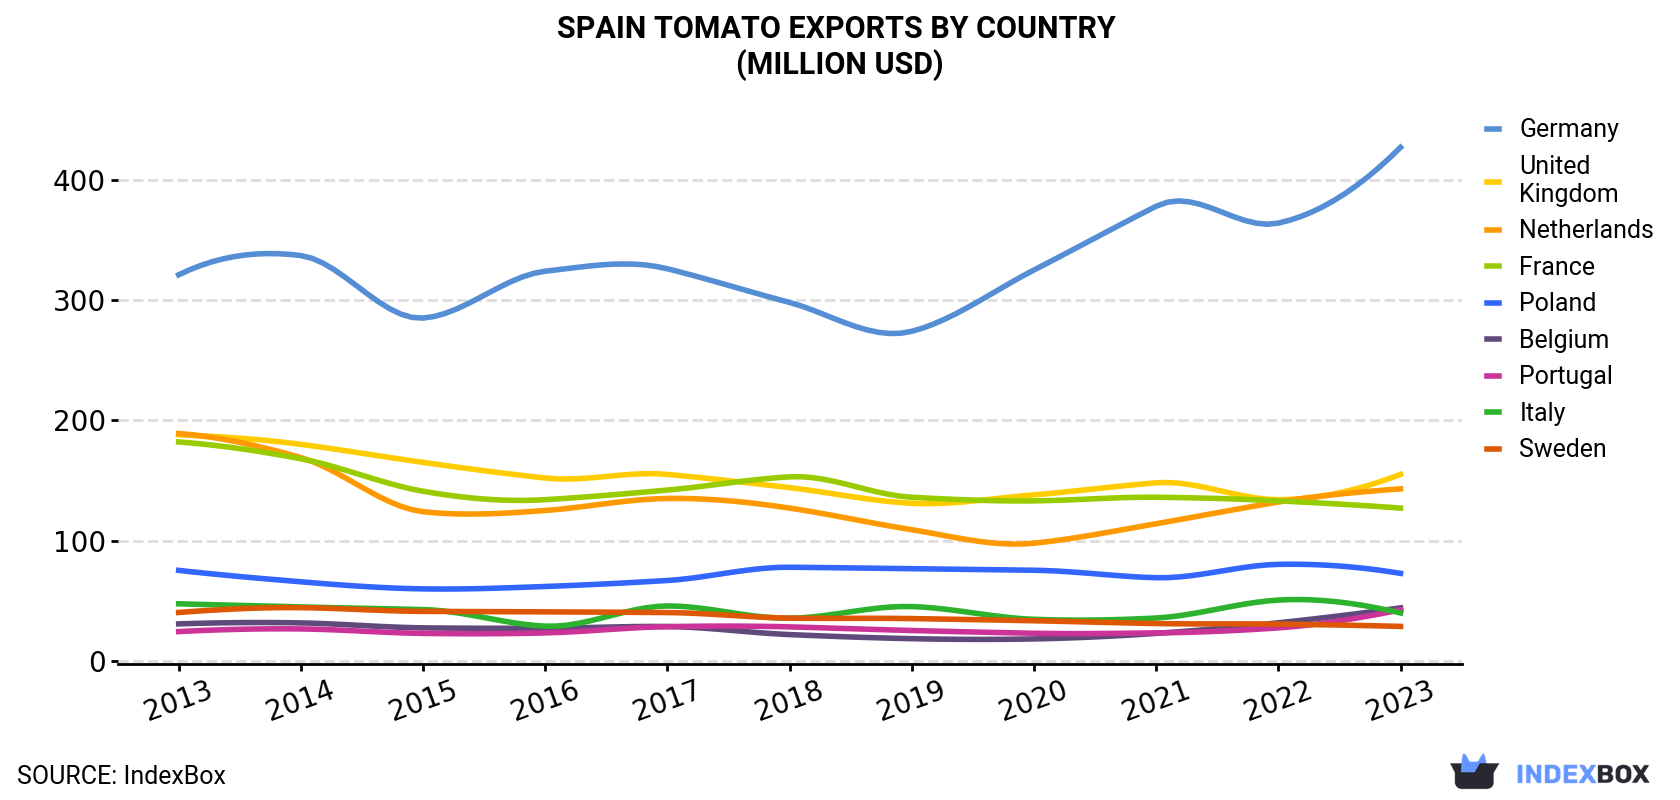 Spain Tomato Exports By Country (Million USD)